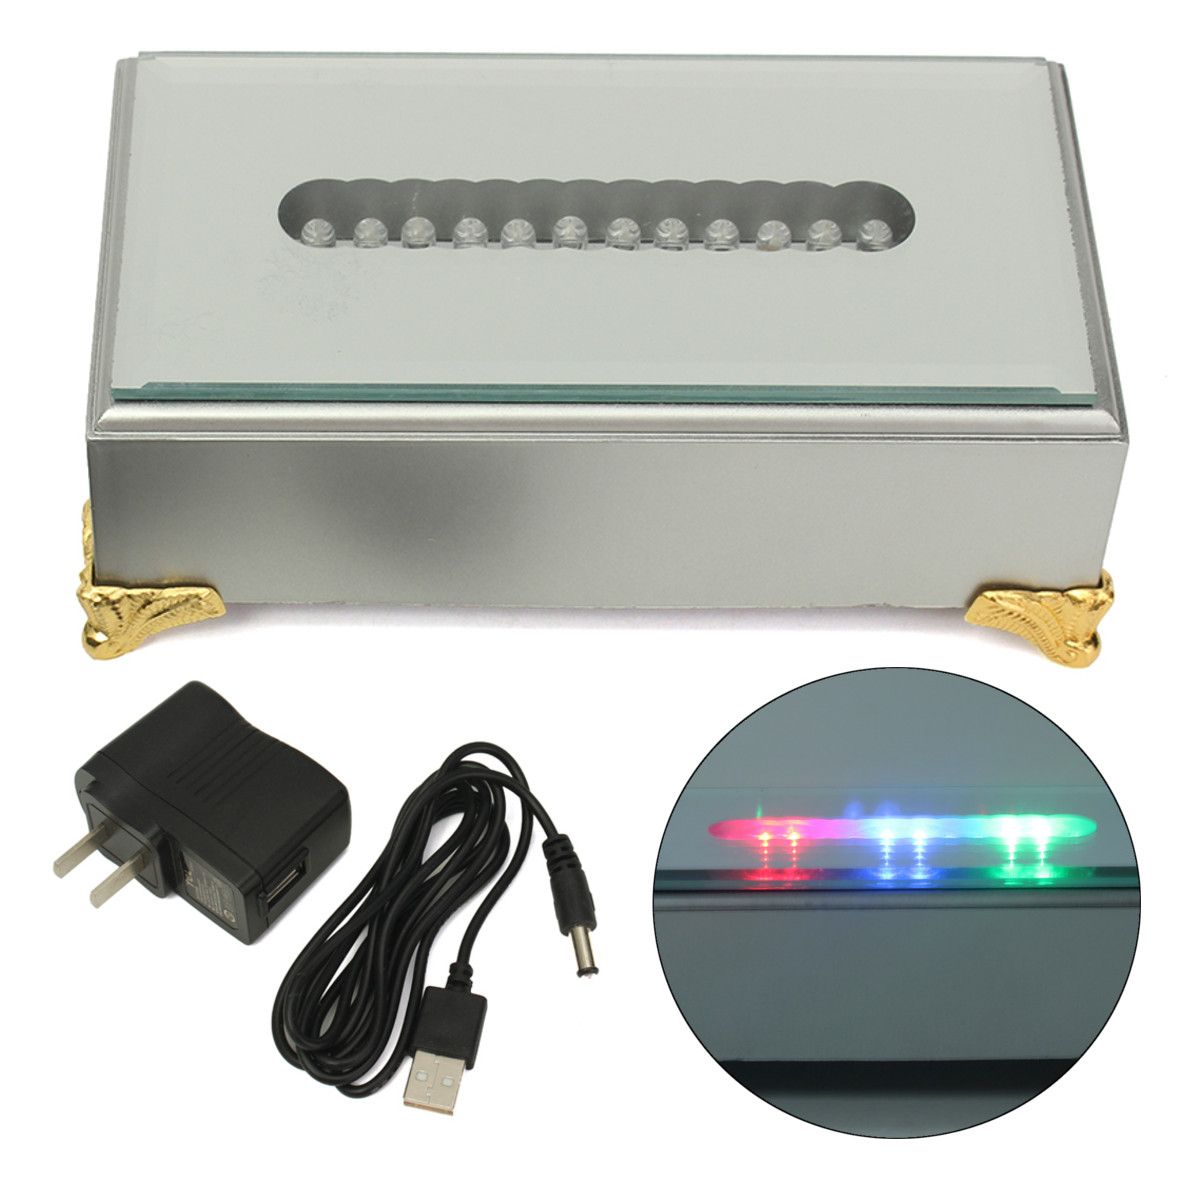 USB-12-LED-White-Colorful-Light-Stand-Light-Base-Crystal-Glass-Display-Adapter-1466195